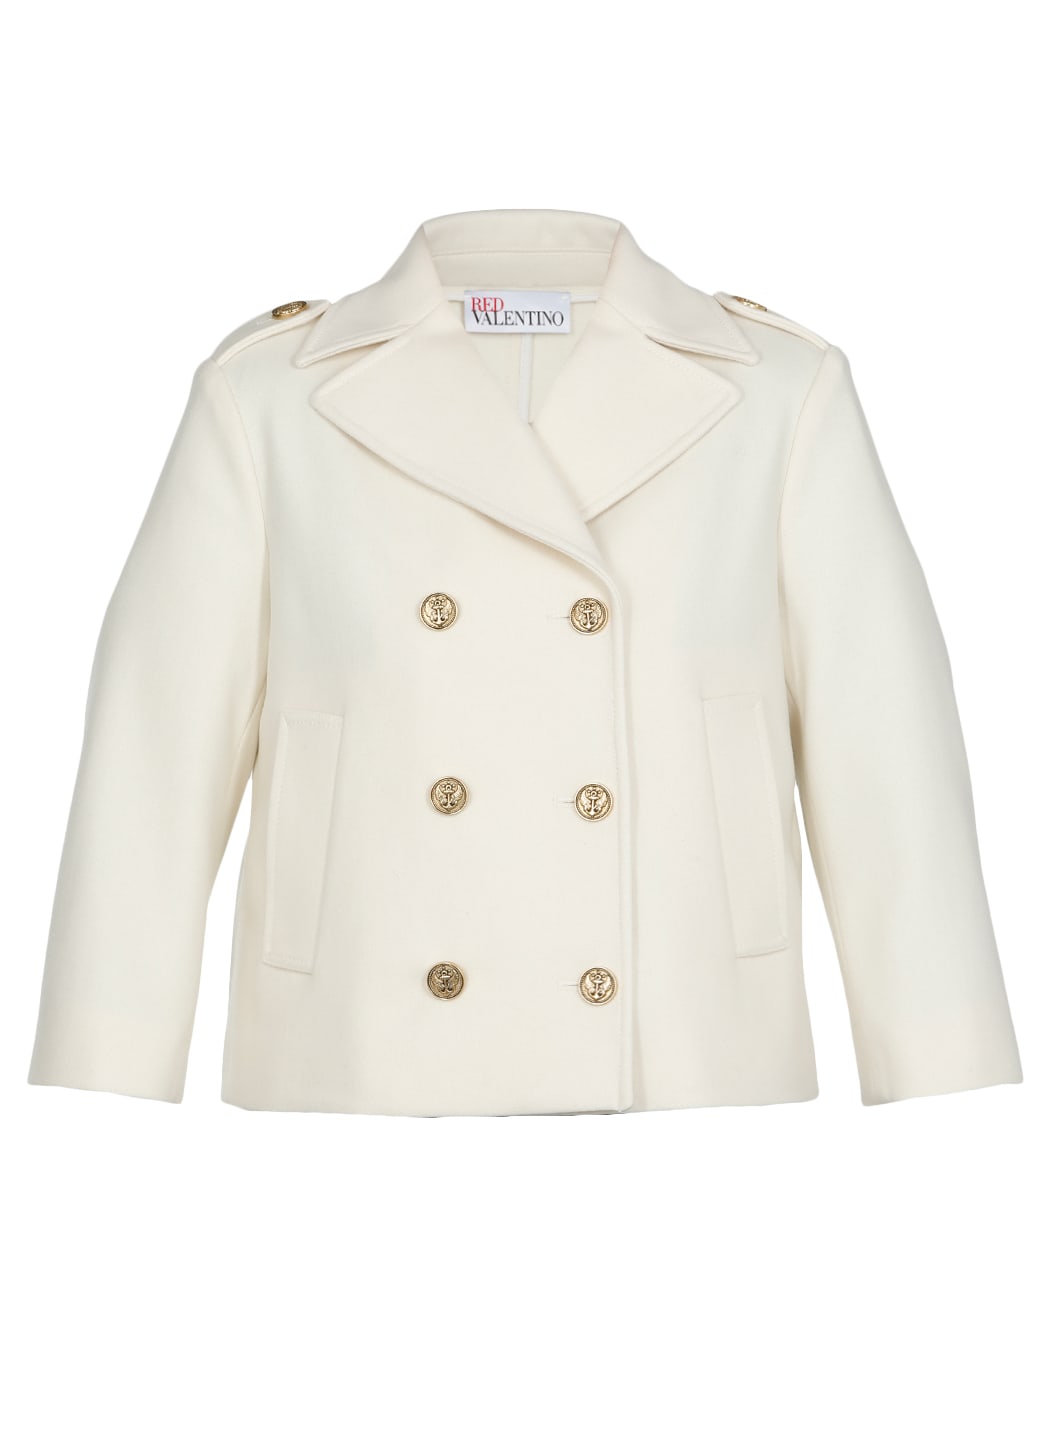 RED Valentino Wool Blend Double Breasted Jacket